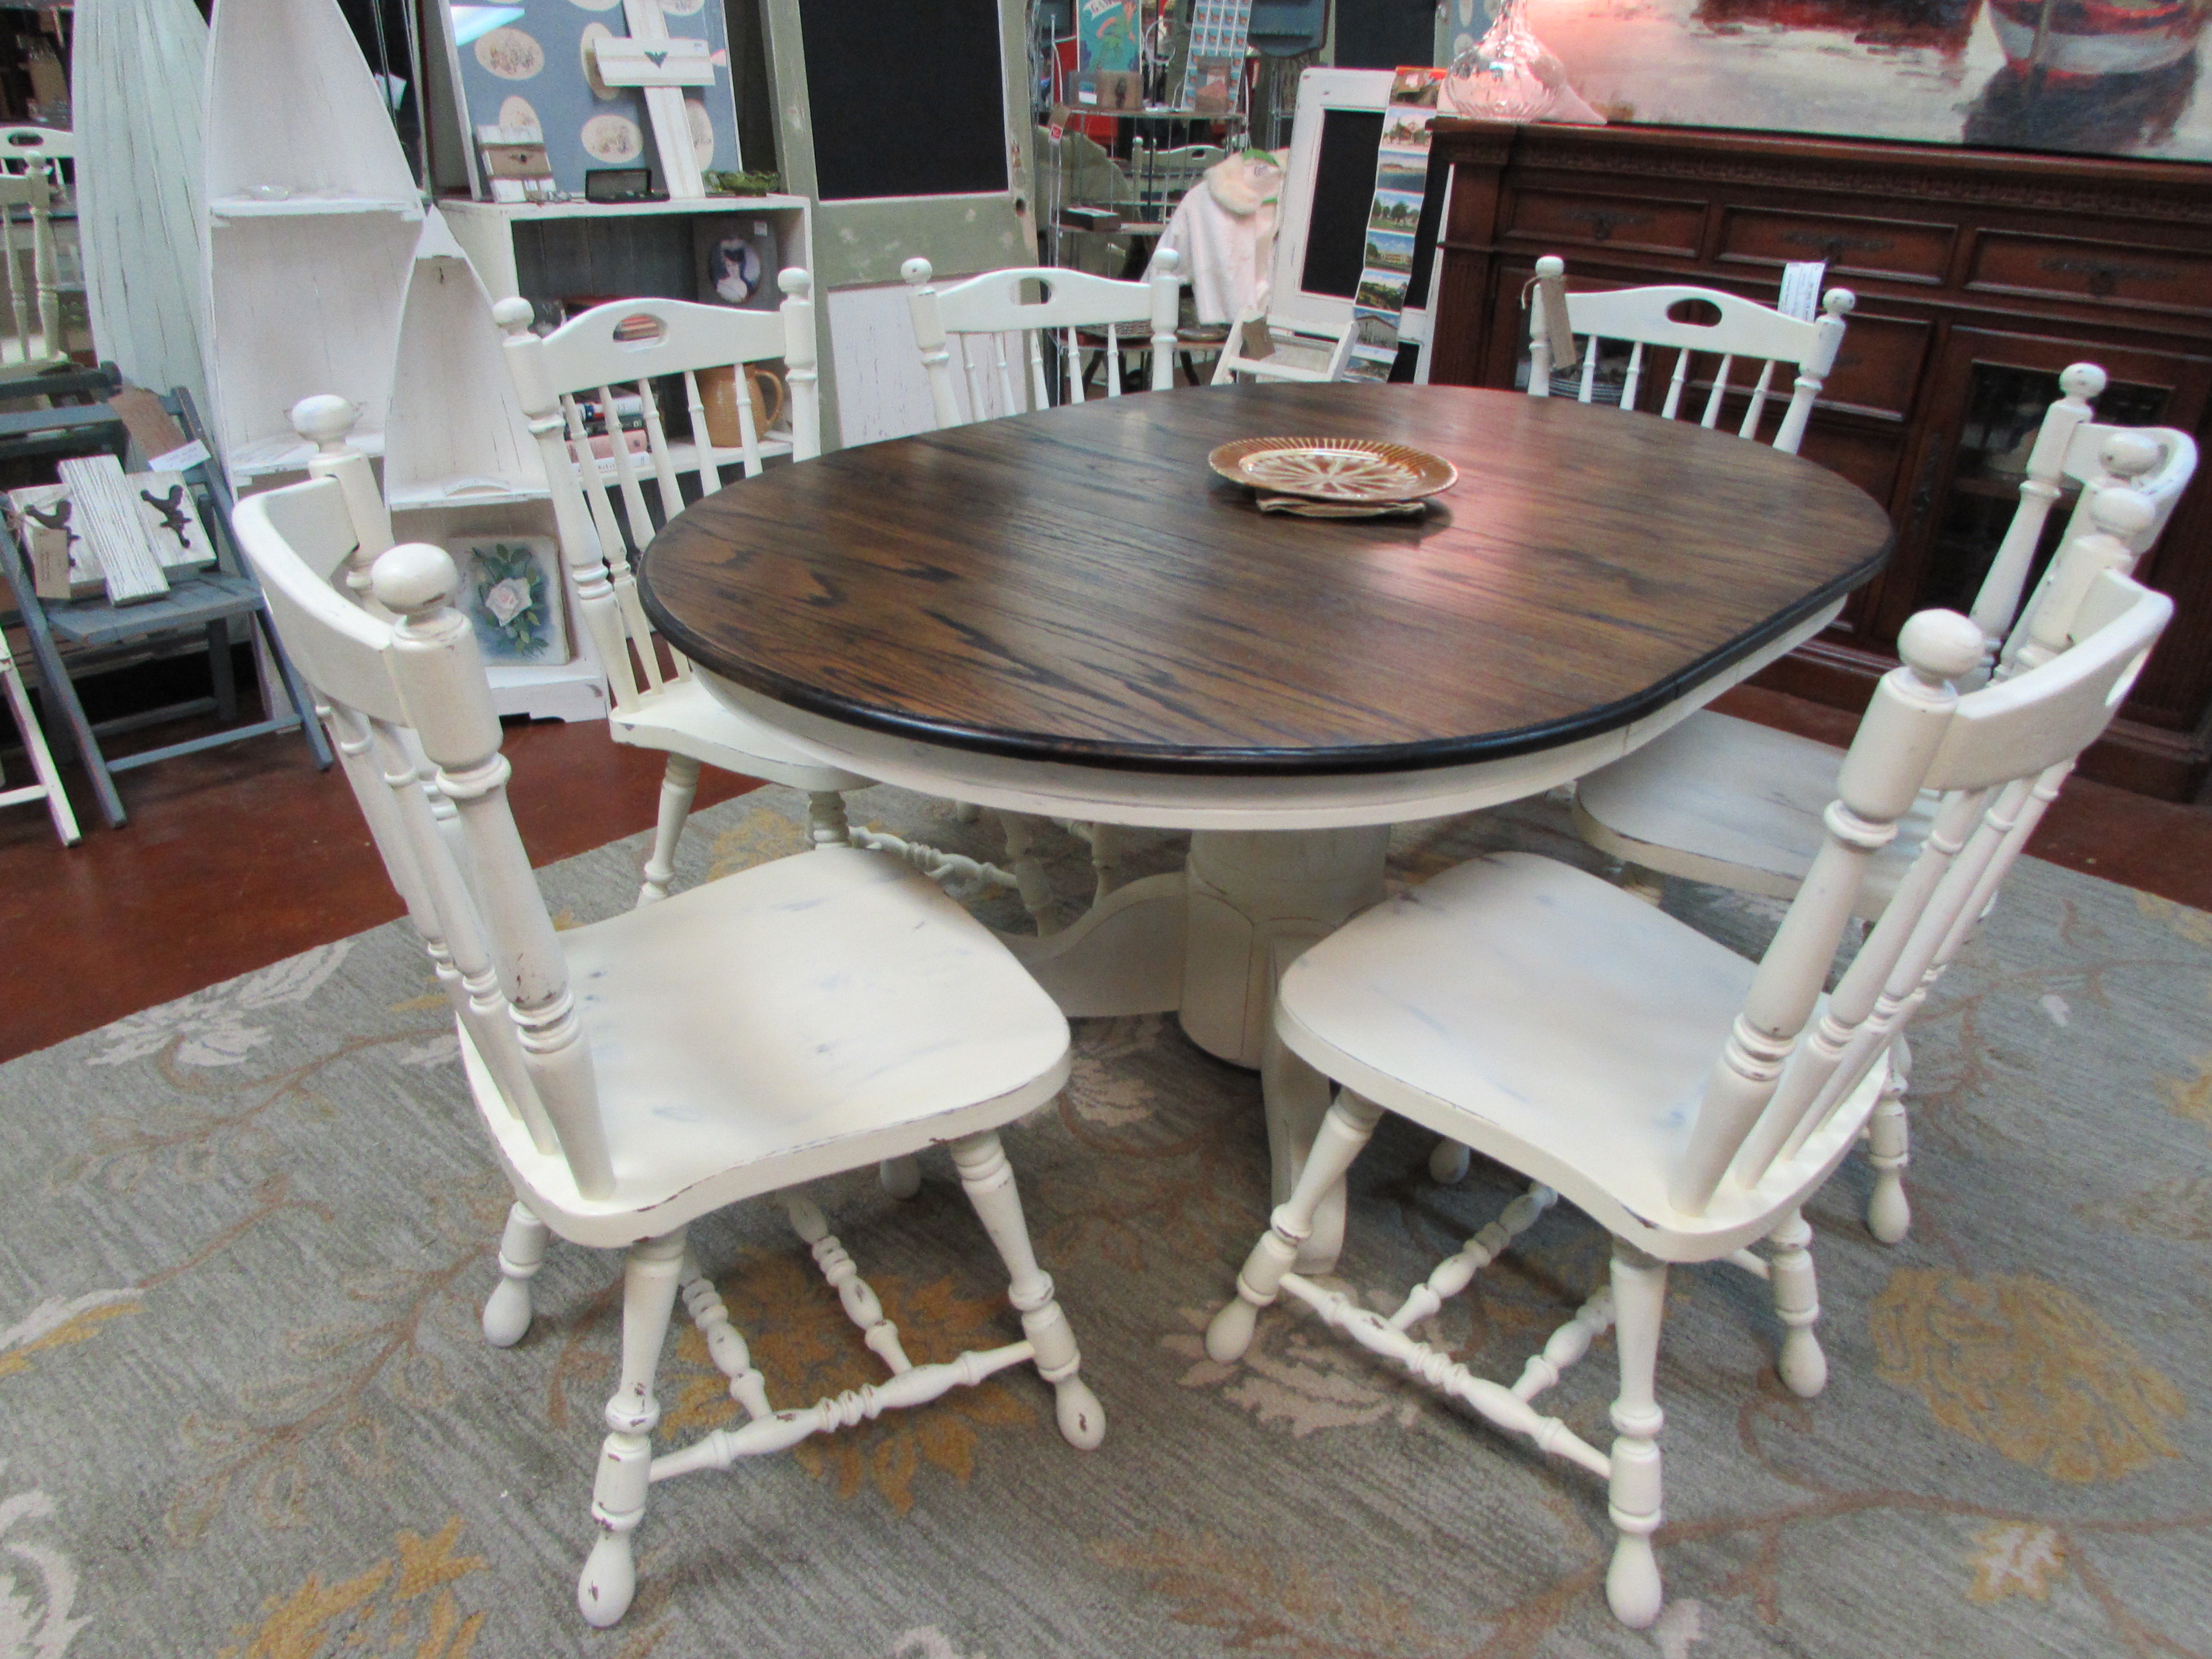 REFINISHED SOLID OAK PEDESTAL TABLE with MATCHING CHAIRS | Just Fine ...